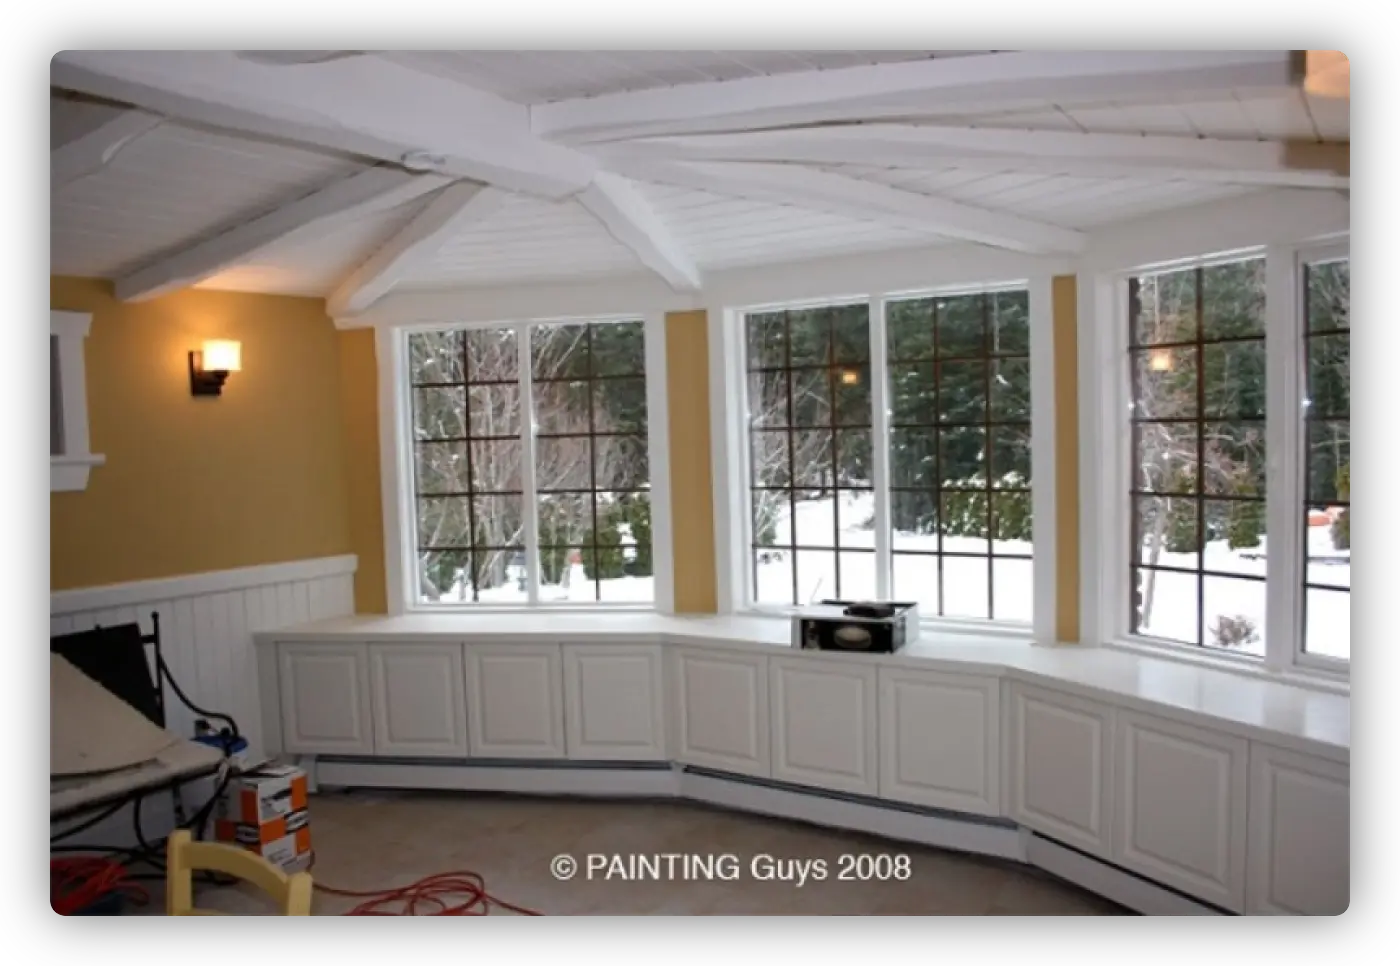 Painting dining rooms - PAINTING Guys